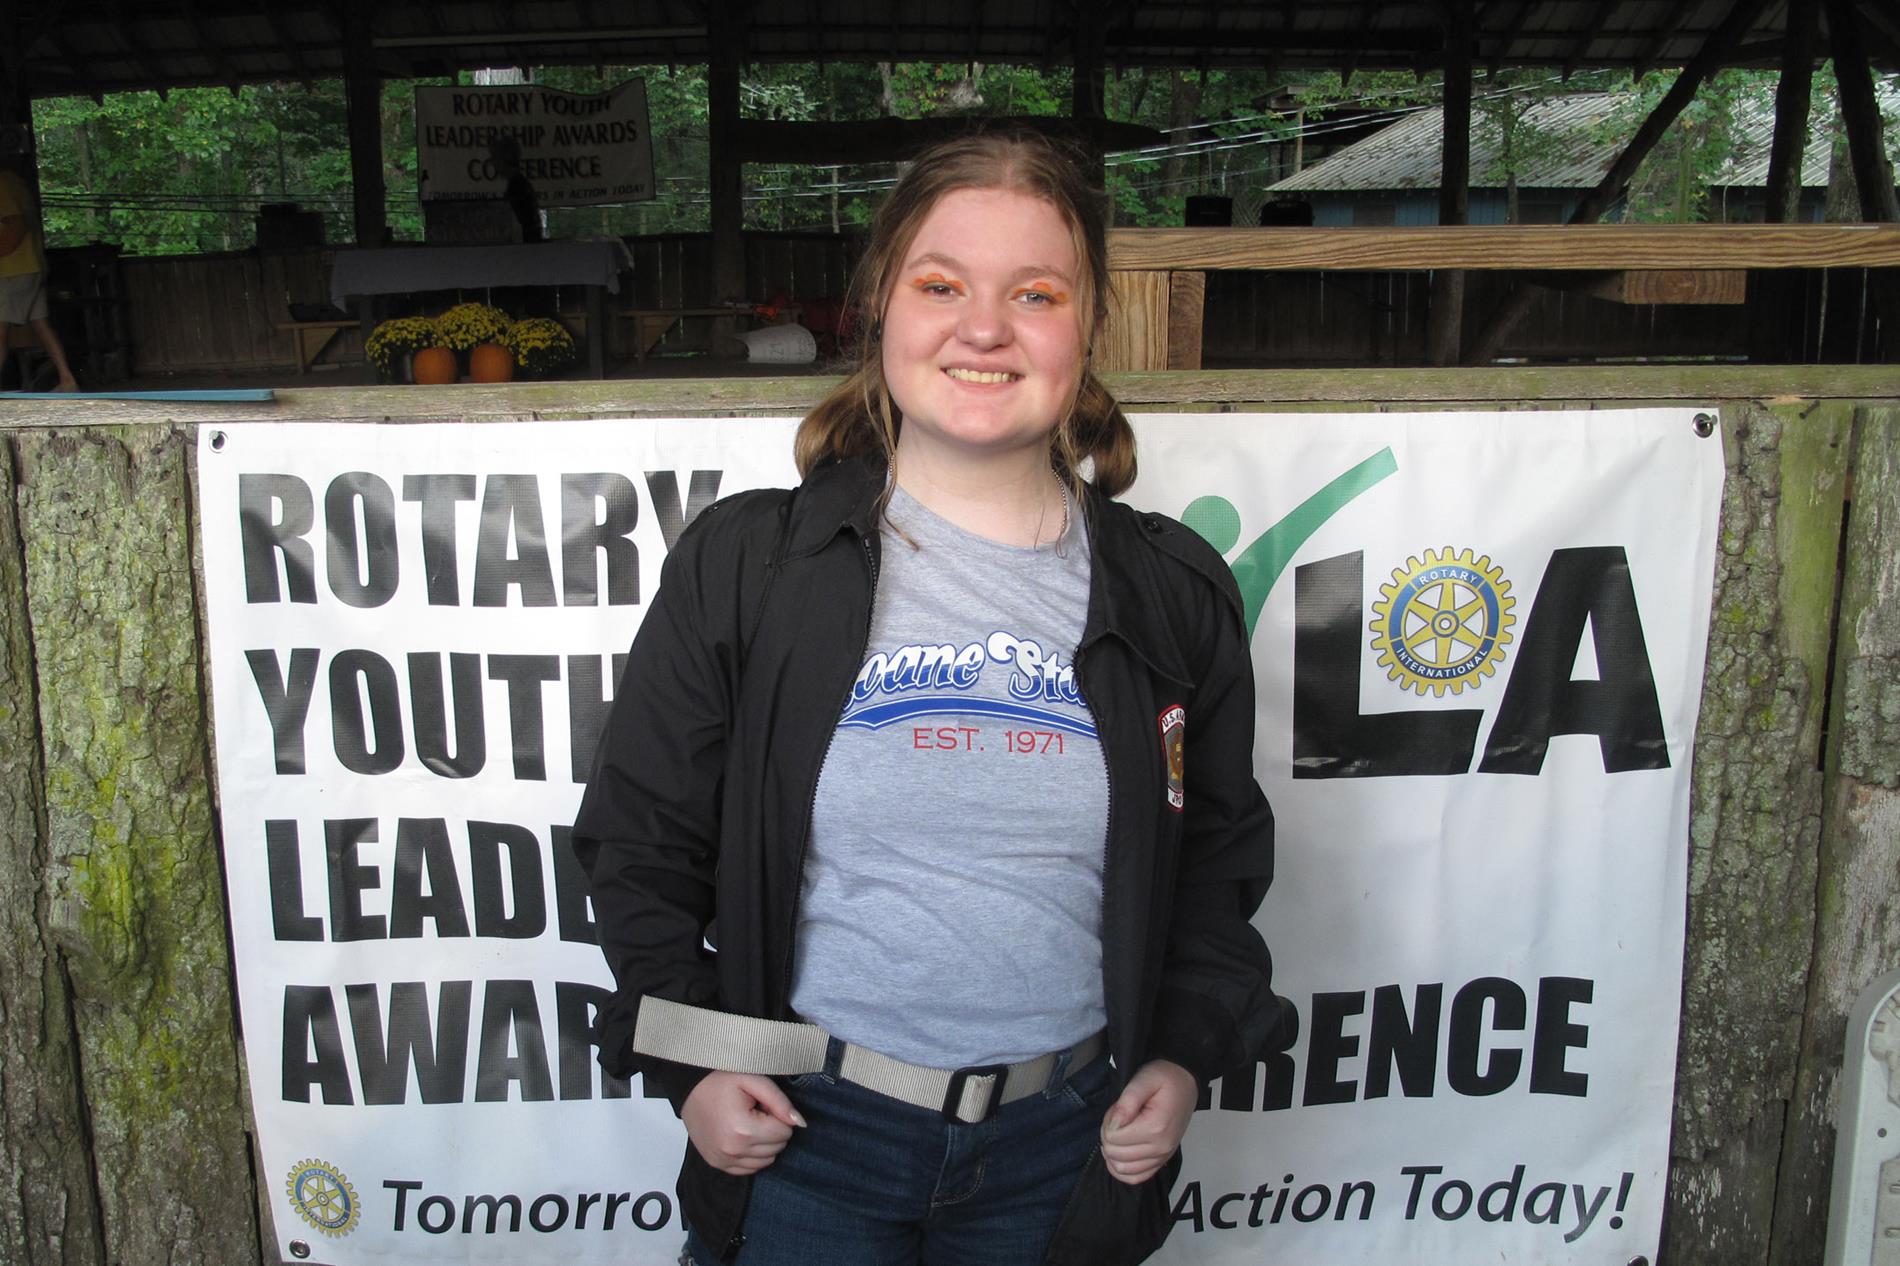 Rotary Youth Leadership Awards Conference